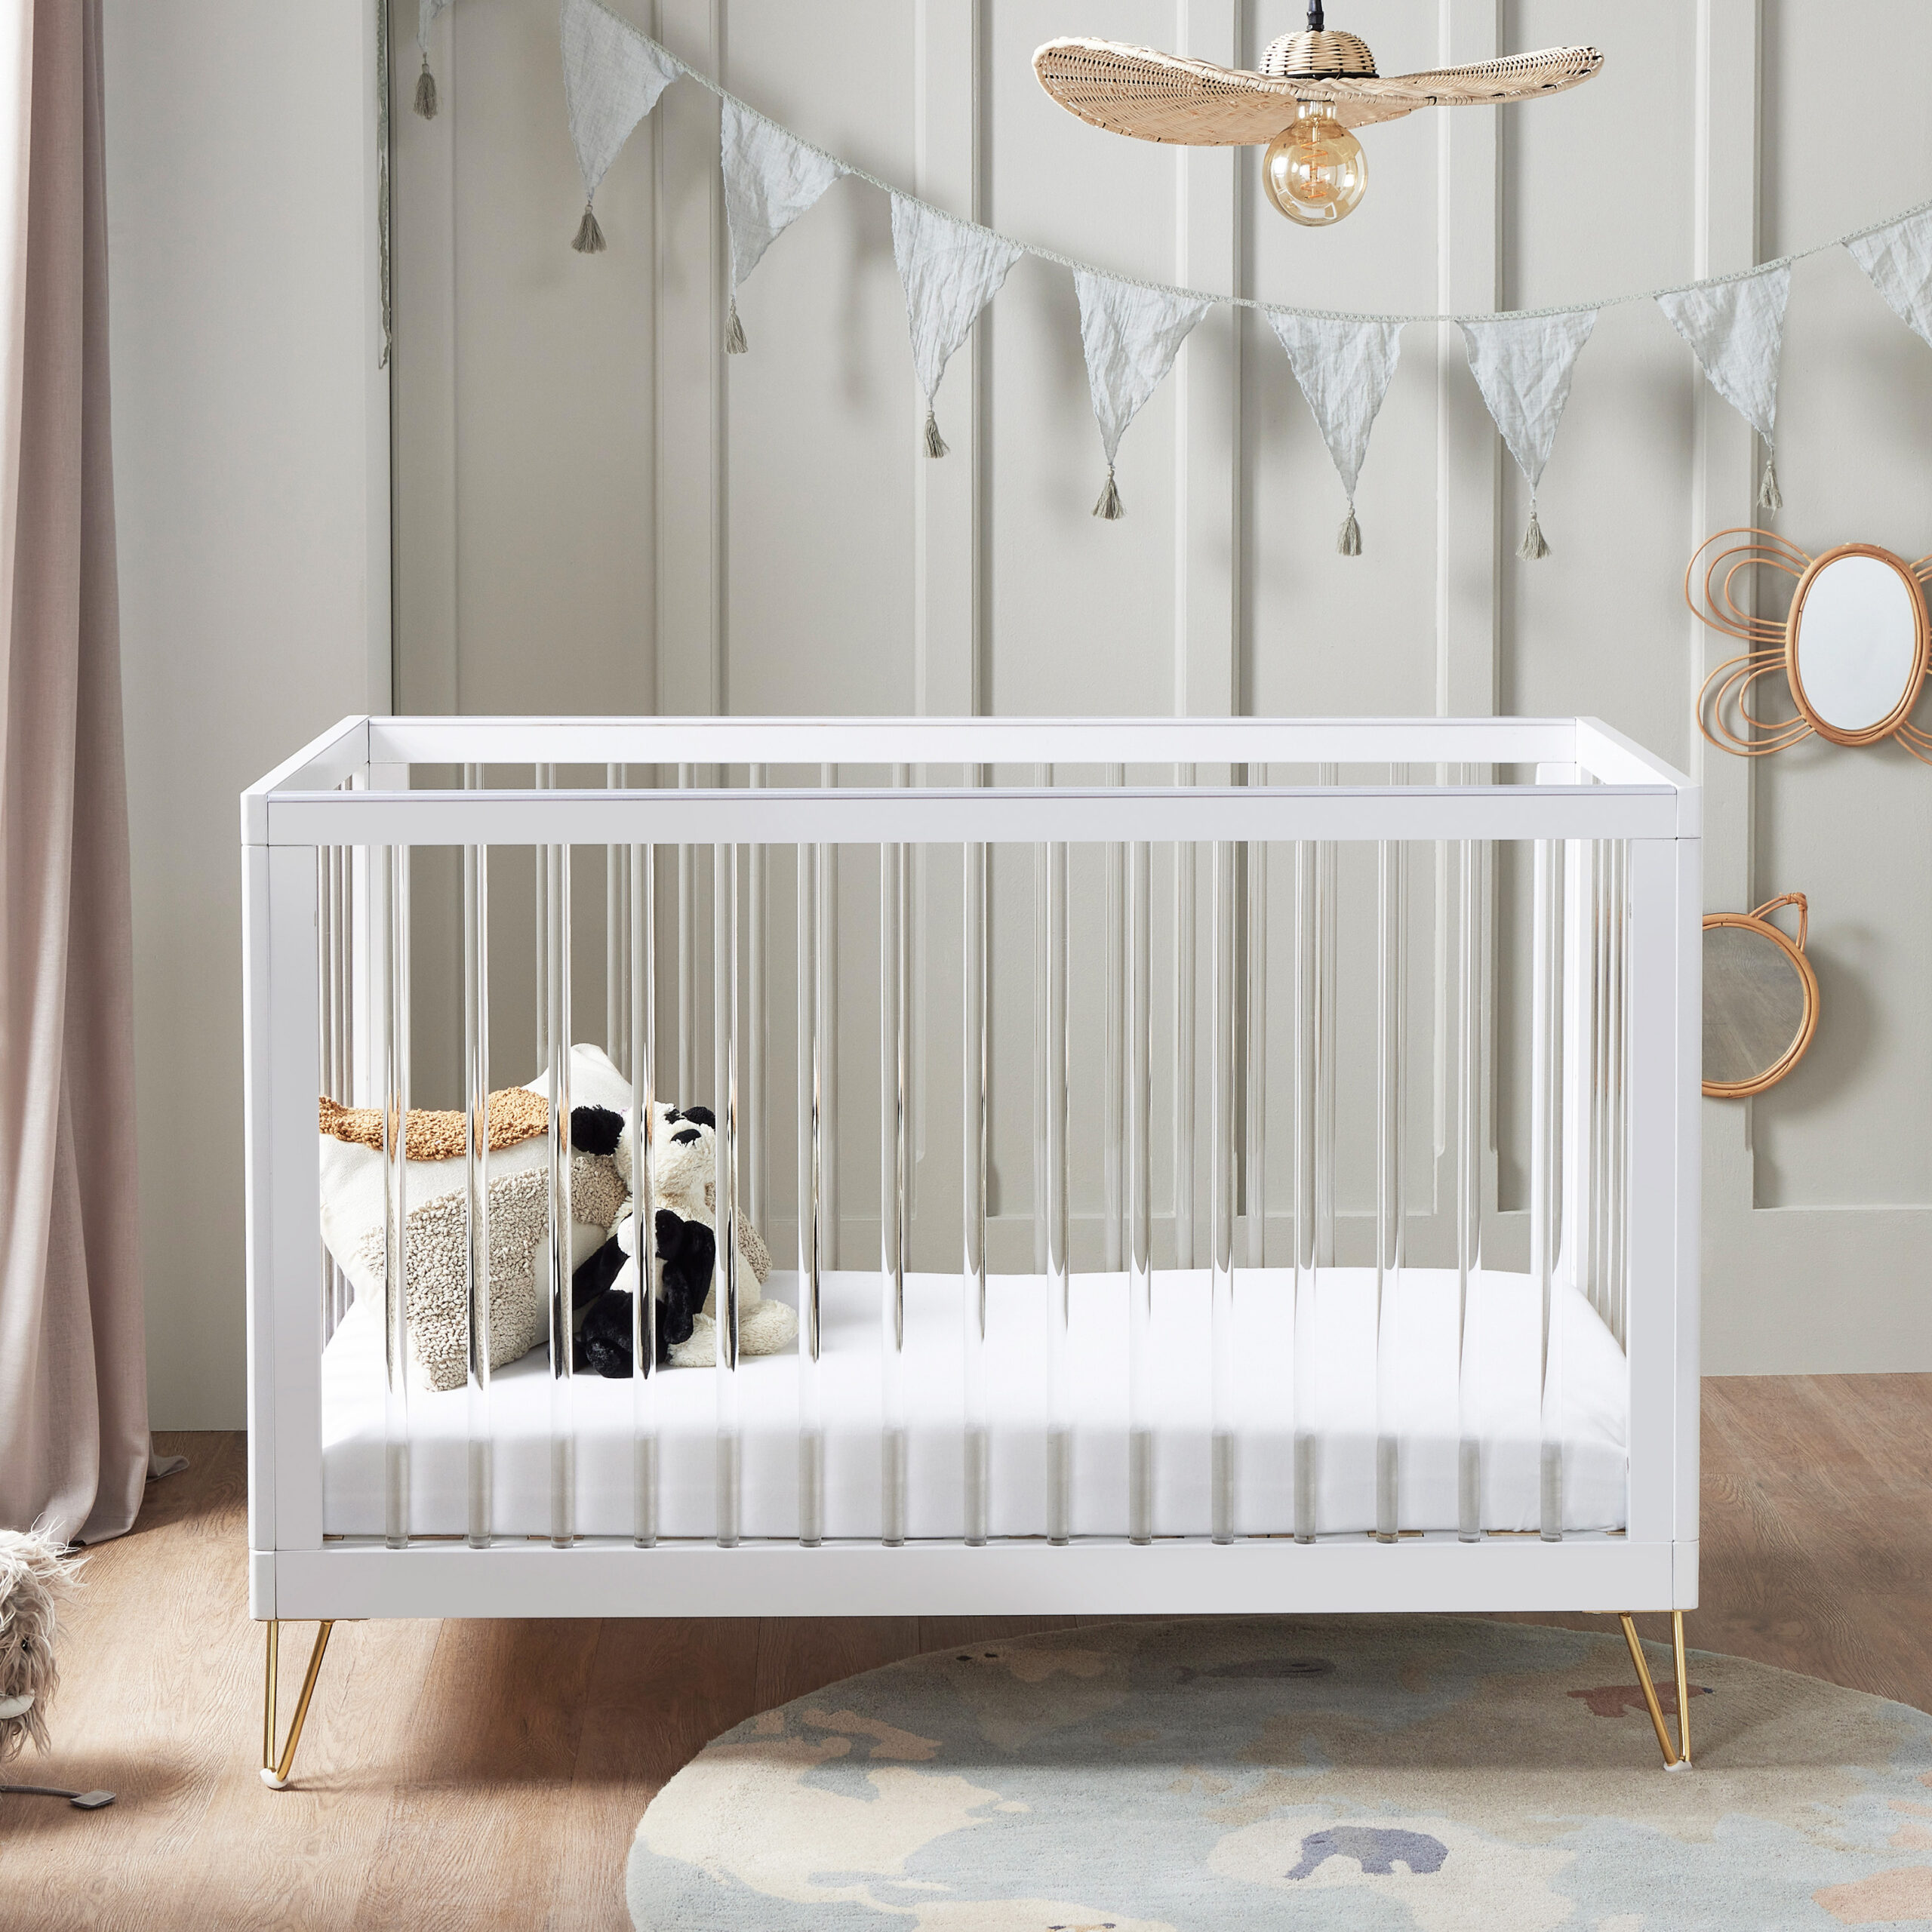 Babymore Kimi Cot Bed Acrylic-2a